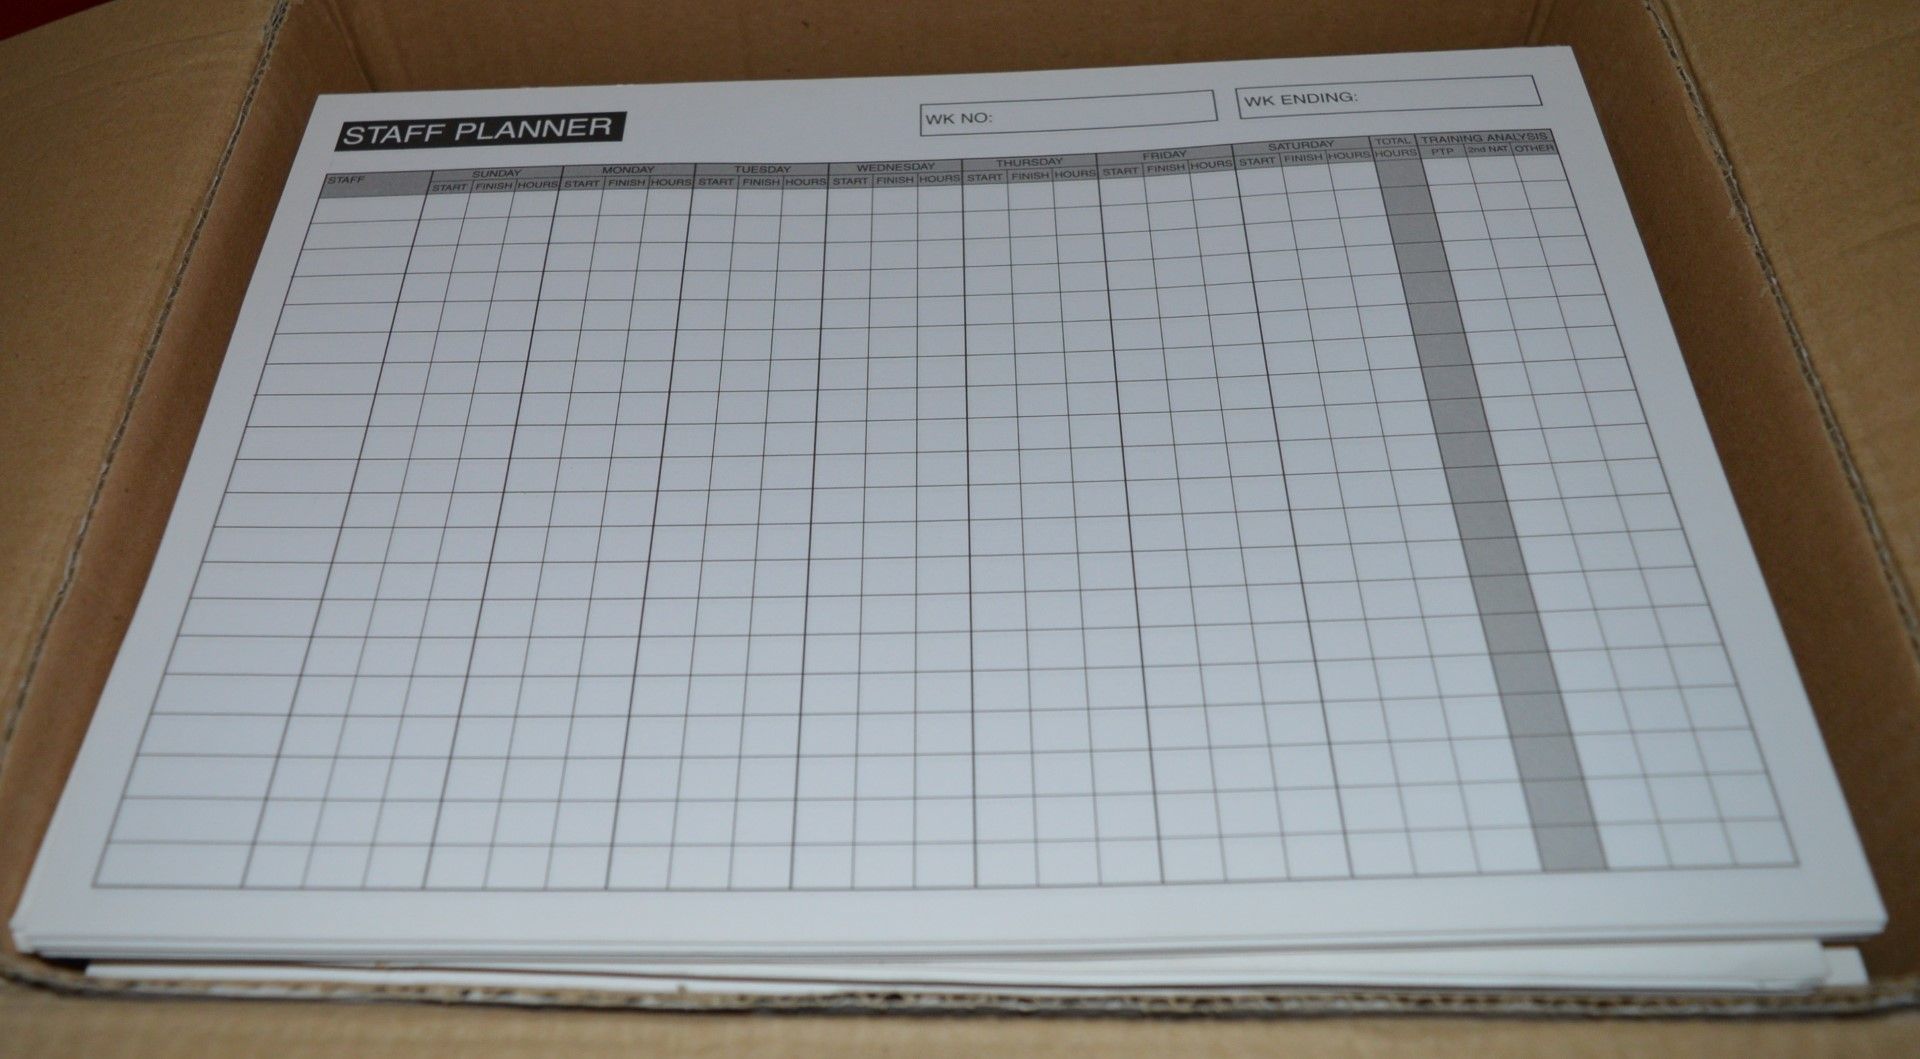 900 x A4 Size Staff Planners - Includes 18 Books of 50 Sheets - New Stock - CL011 - Ref JP024 -